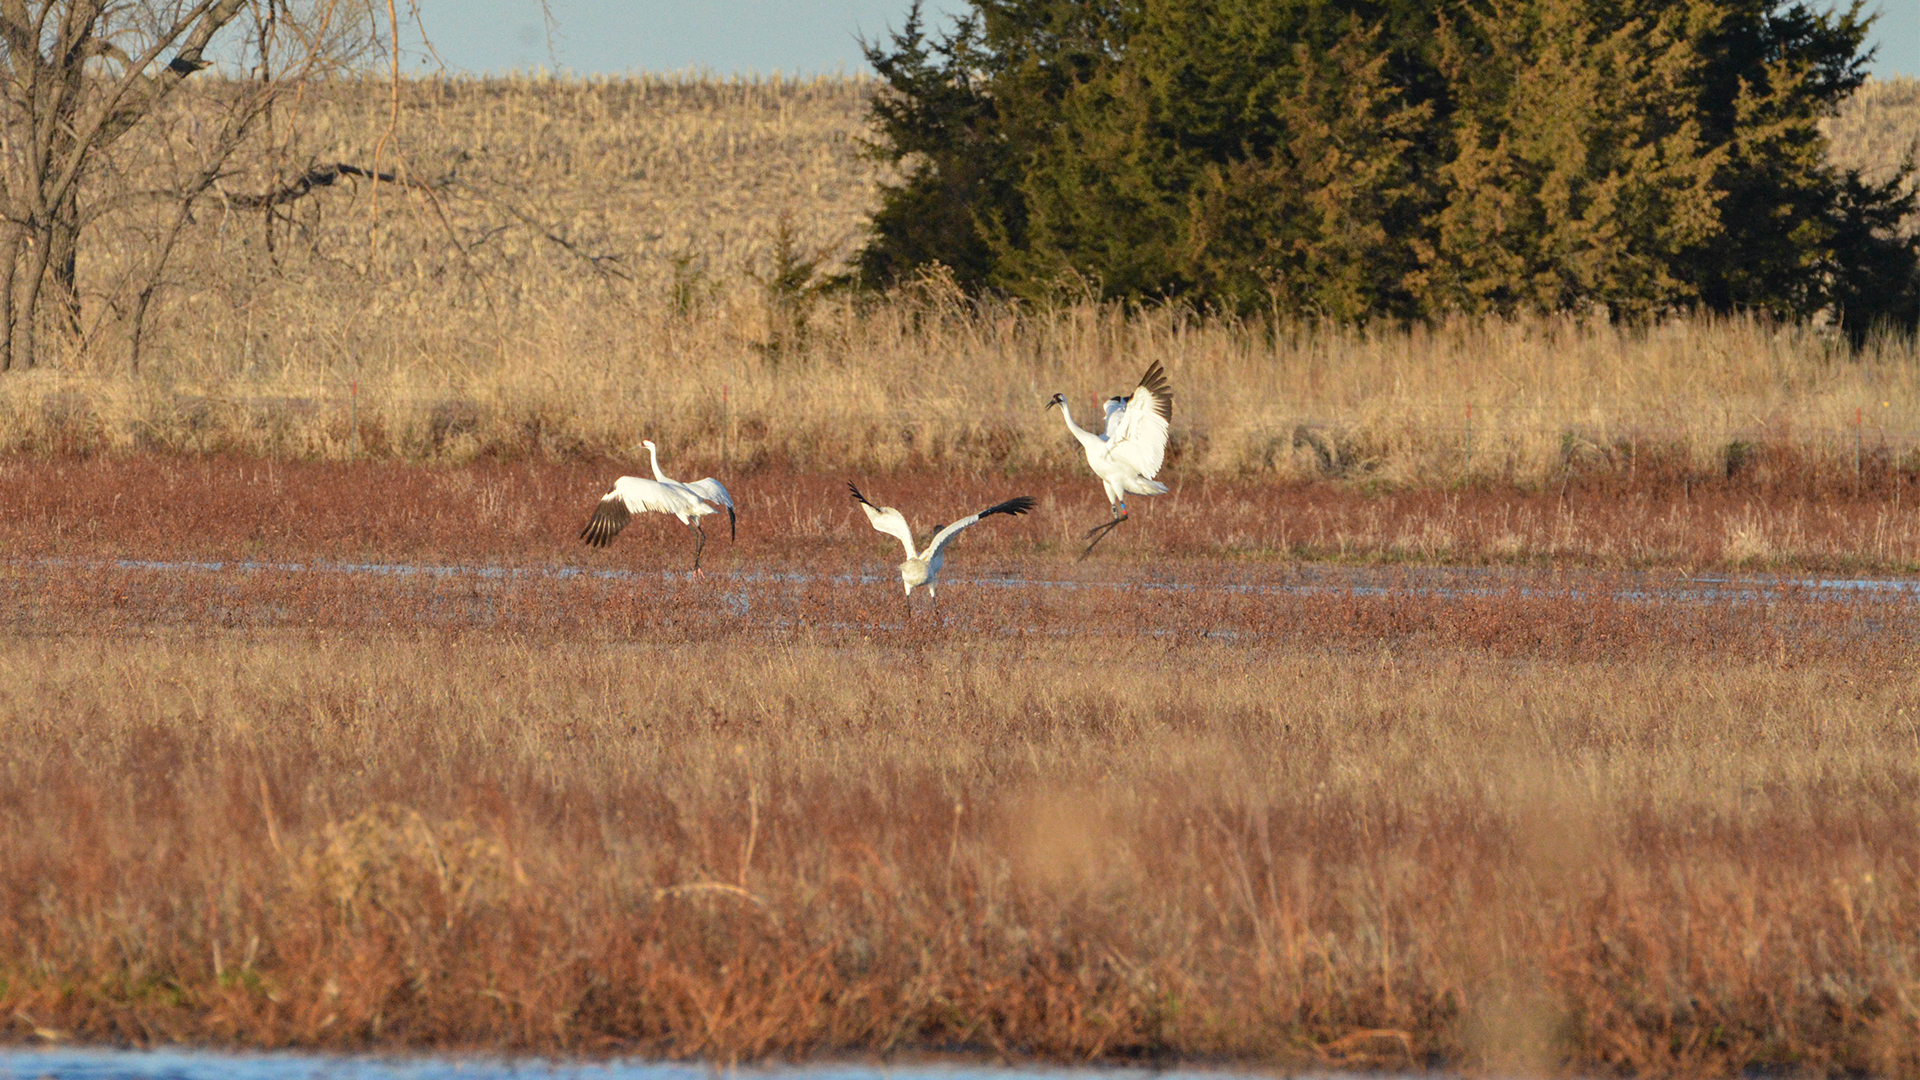 The continued management of Trumbull Basin has helped maintain this site as ideal wetland habitat for migrating birds. Photo courtesy of David Baasch and the Crane Trust.